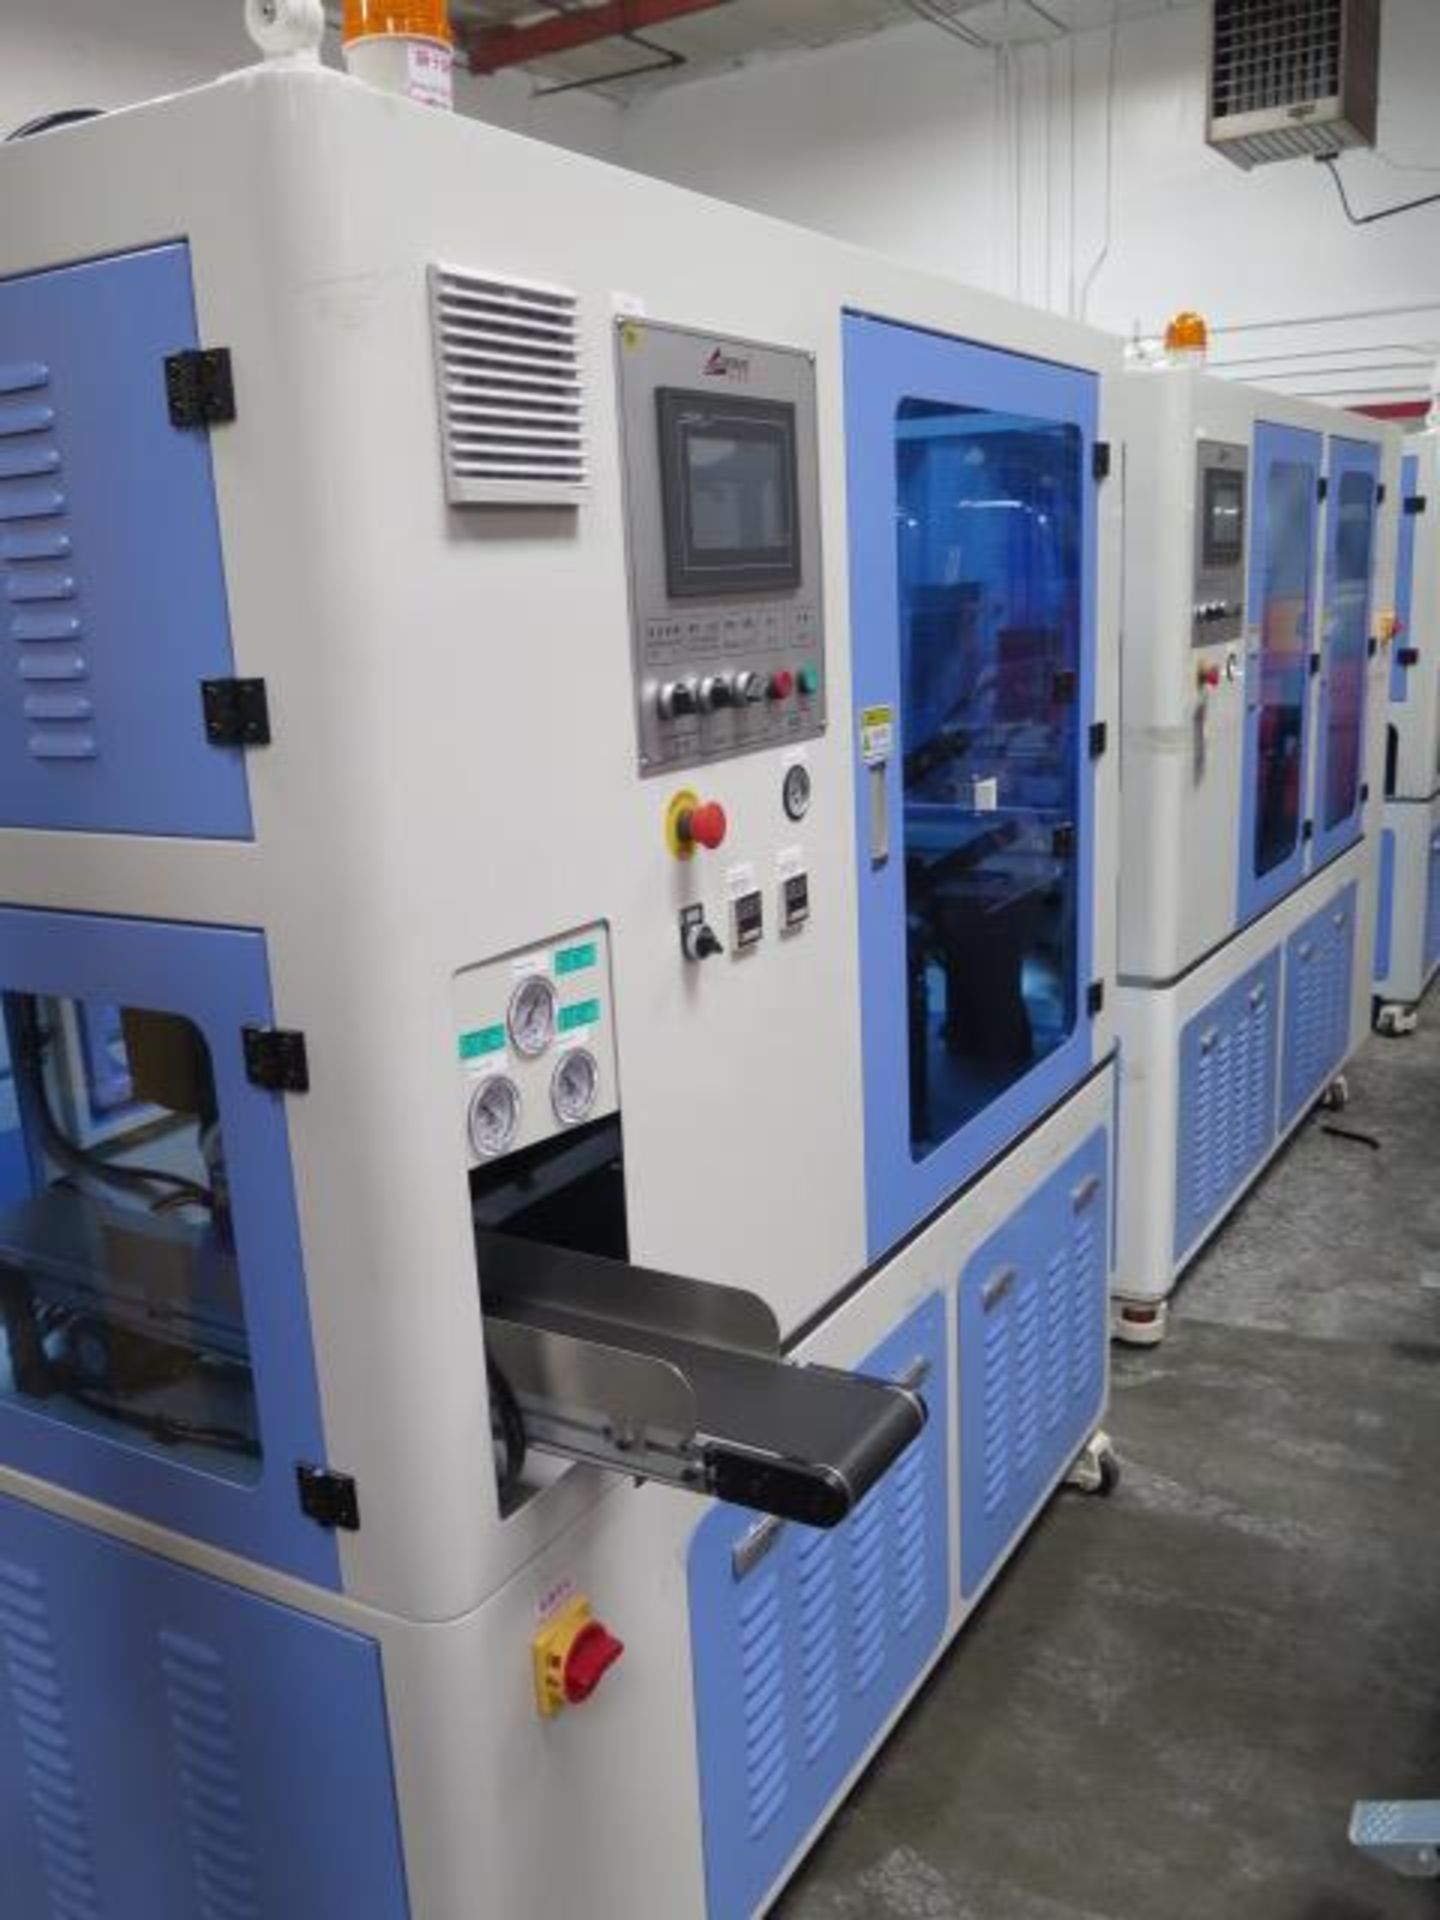 2021 Gereke mdl. GRK-TWO1 Cassette Assembly and Packaging Line w/ PLC Controllers, SOLD AS IS